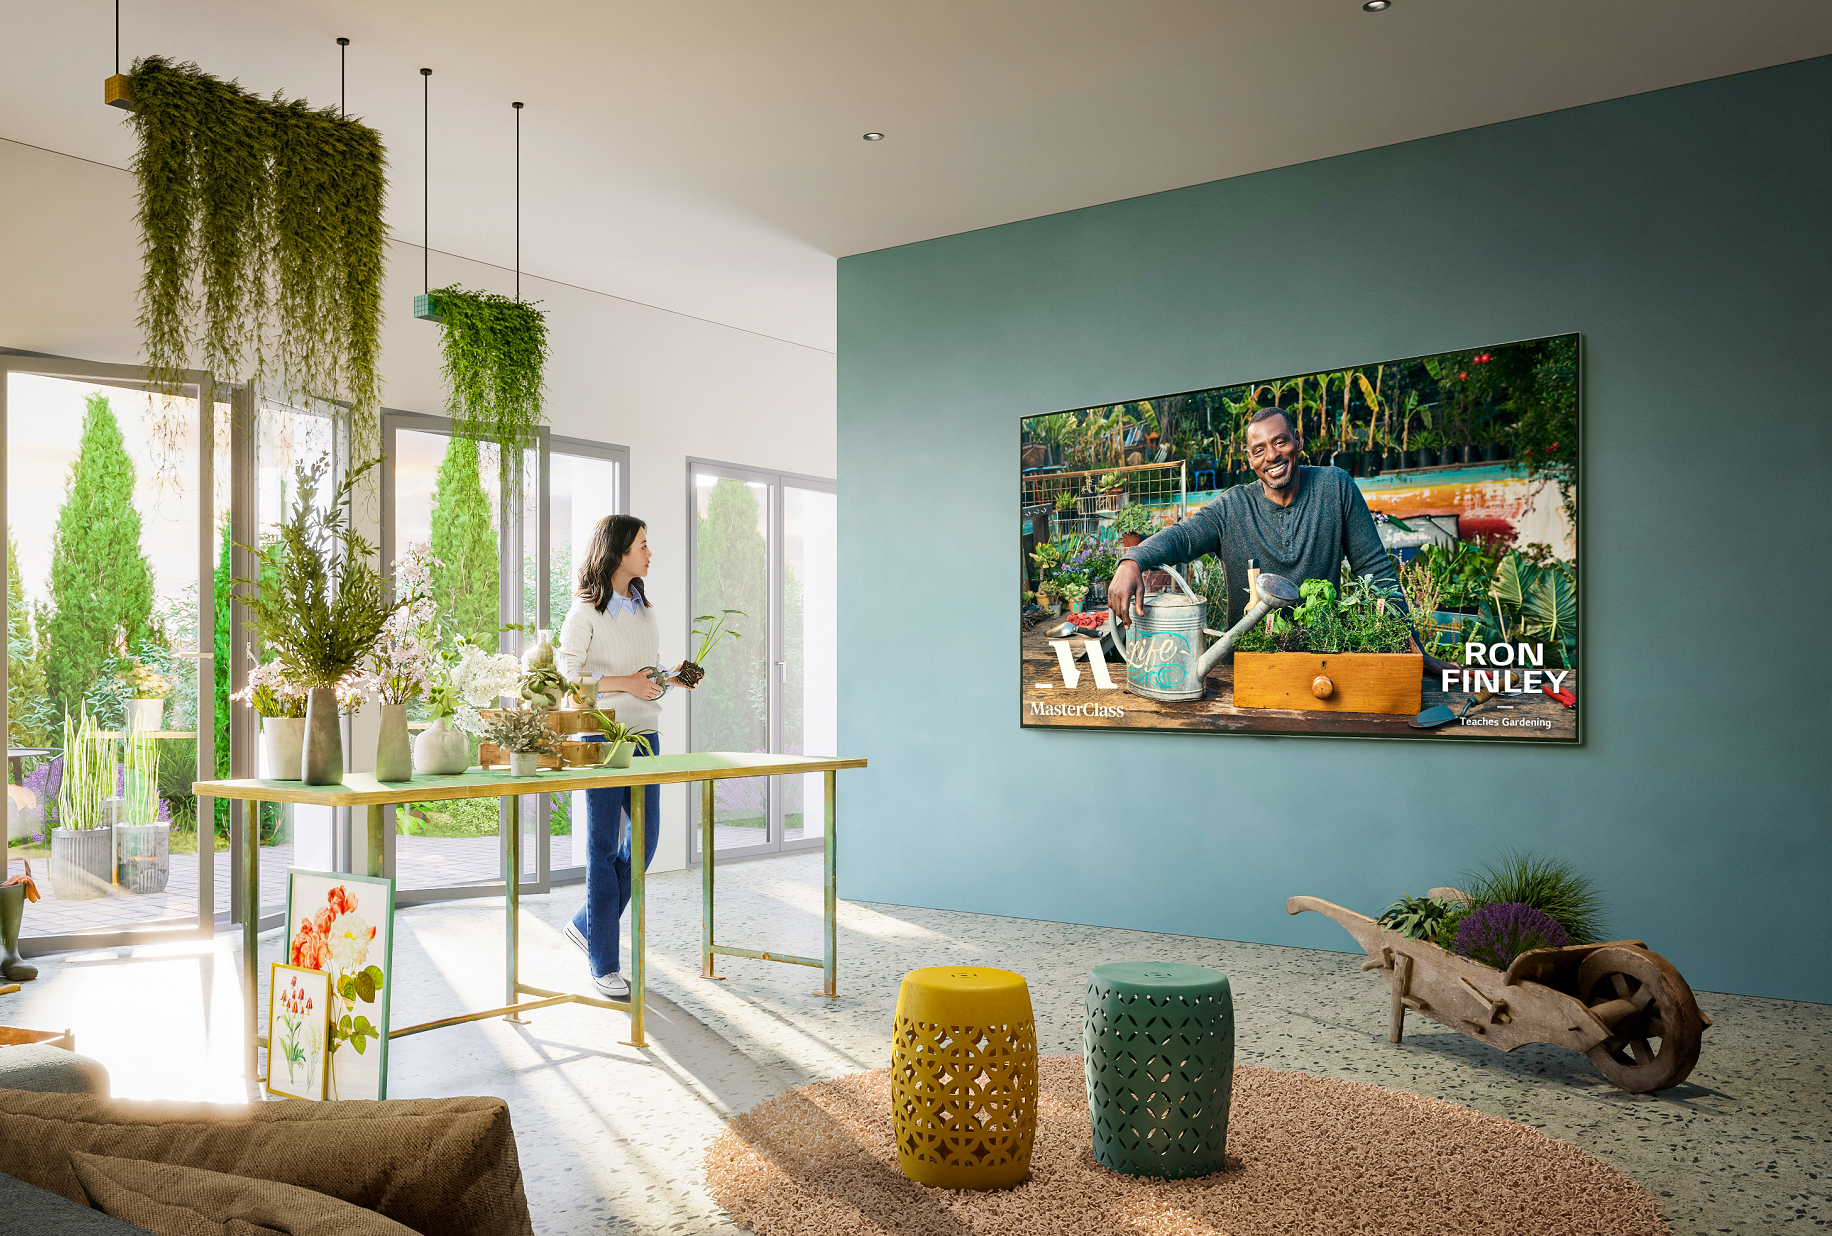 A woman watching a gardening lesson from the MasterClass app on her wall-mounted LG Smart TV as she tends to her plants